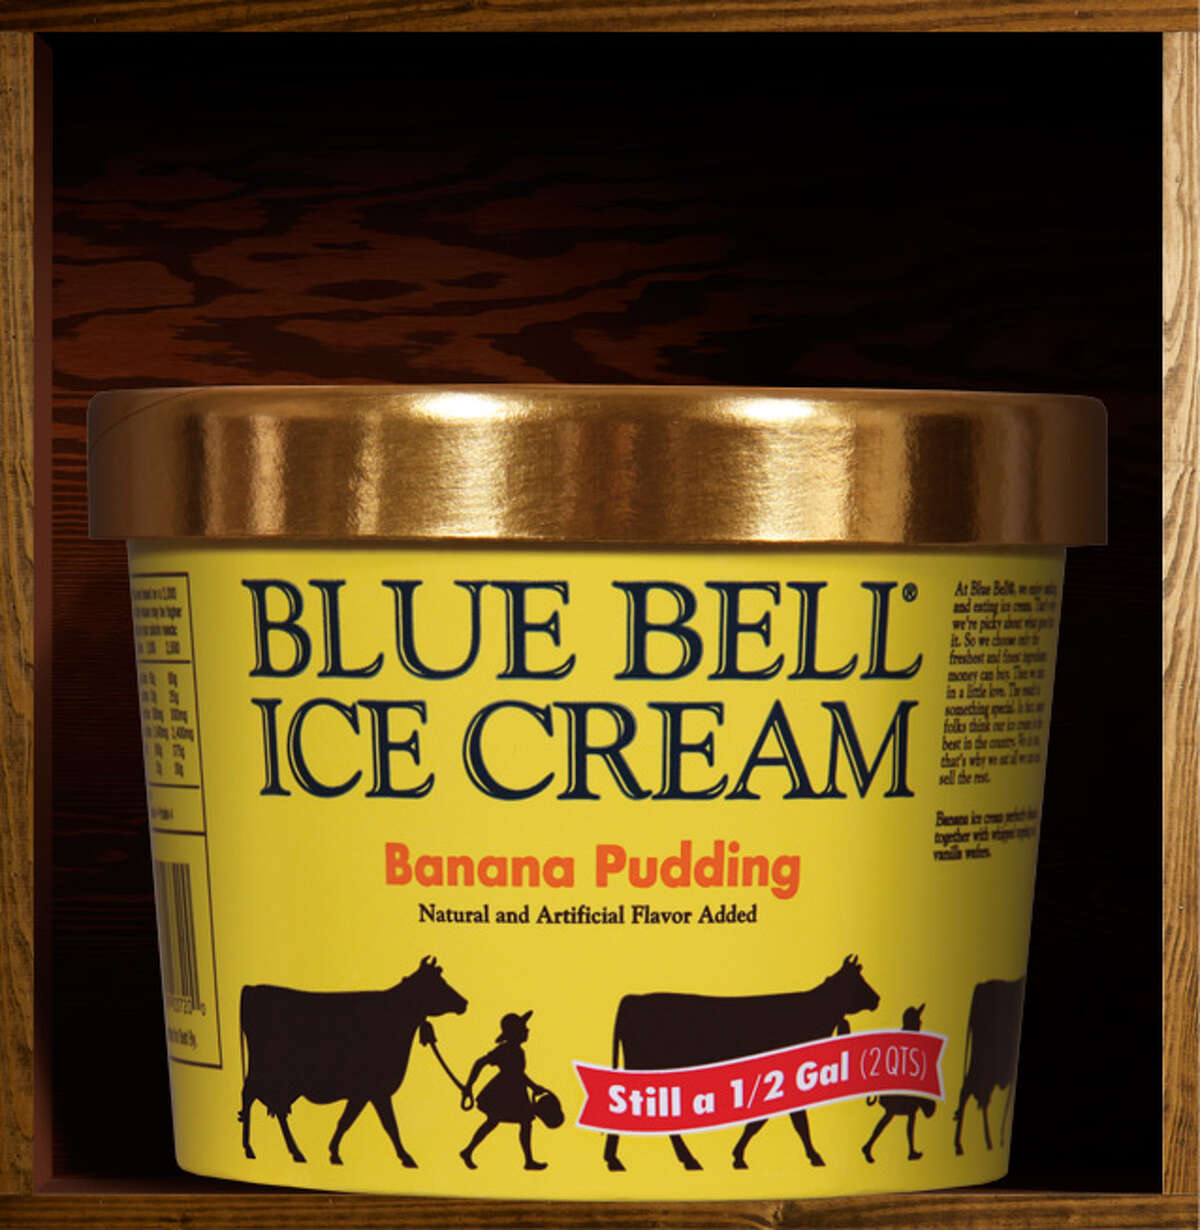 Texas Man Writes Hilarious Yet Thorough Review Of New Blue Bell Ice Cream Flavor 